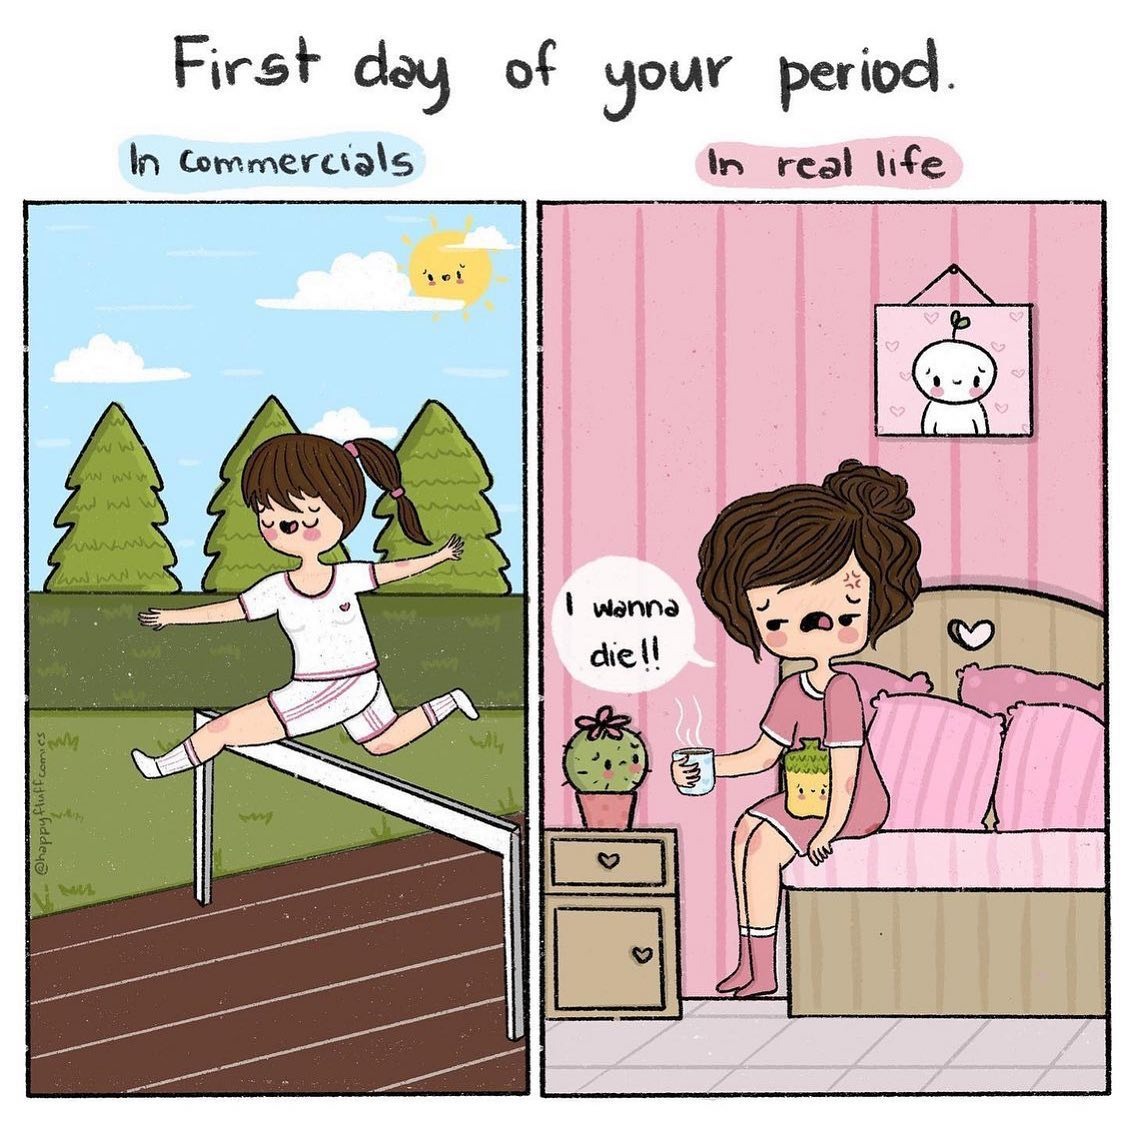 Starting the month with a flow. 💞👑

tag a friend who relates 😫
.
.
.
.
#firstperiod #firstperiodstory #pubertyceremony #pubertyfunction #periodstruggles #periodmemes #gynocup #mildcares